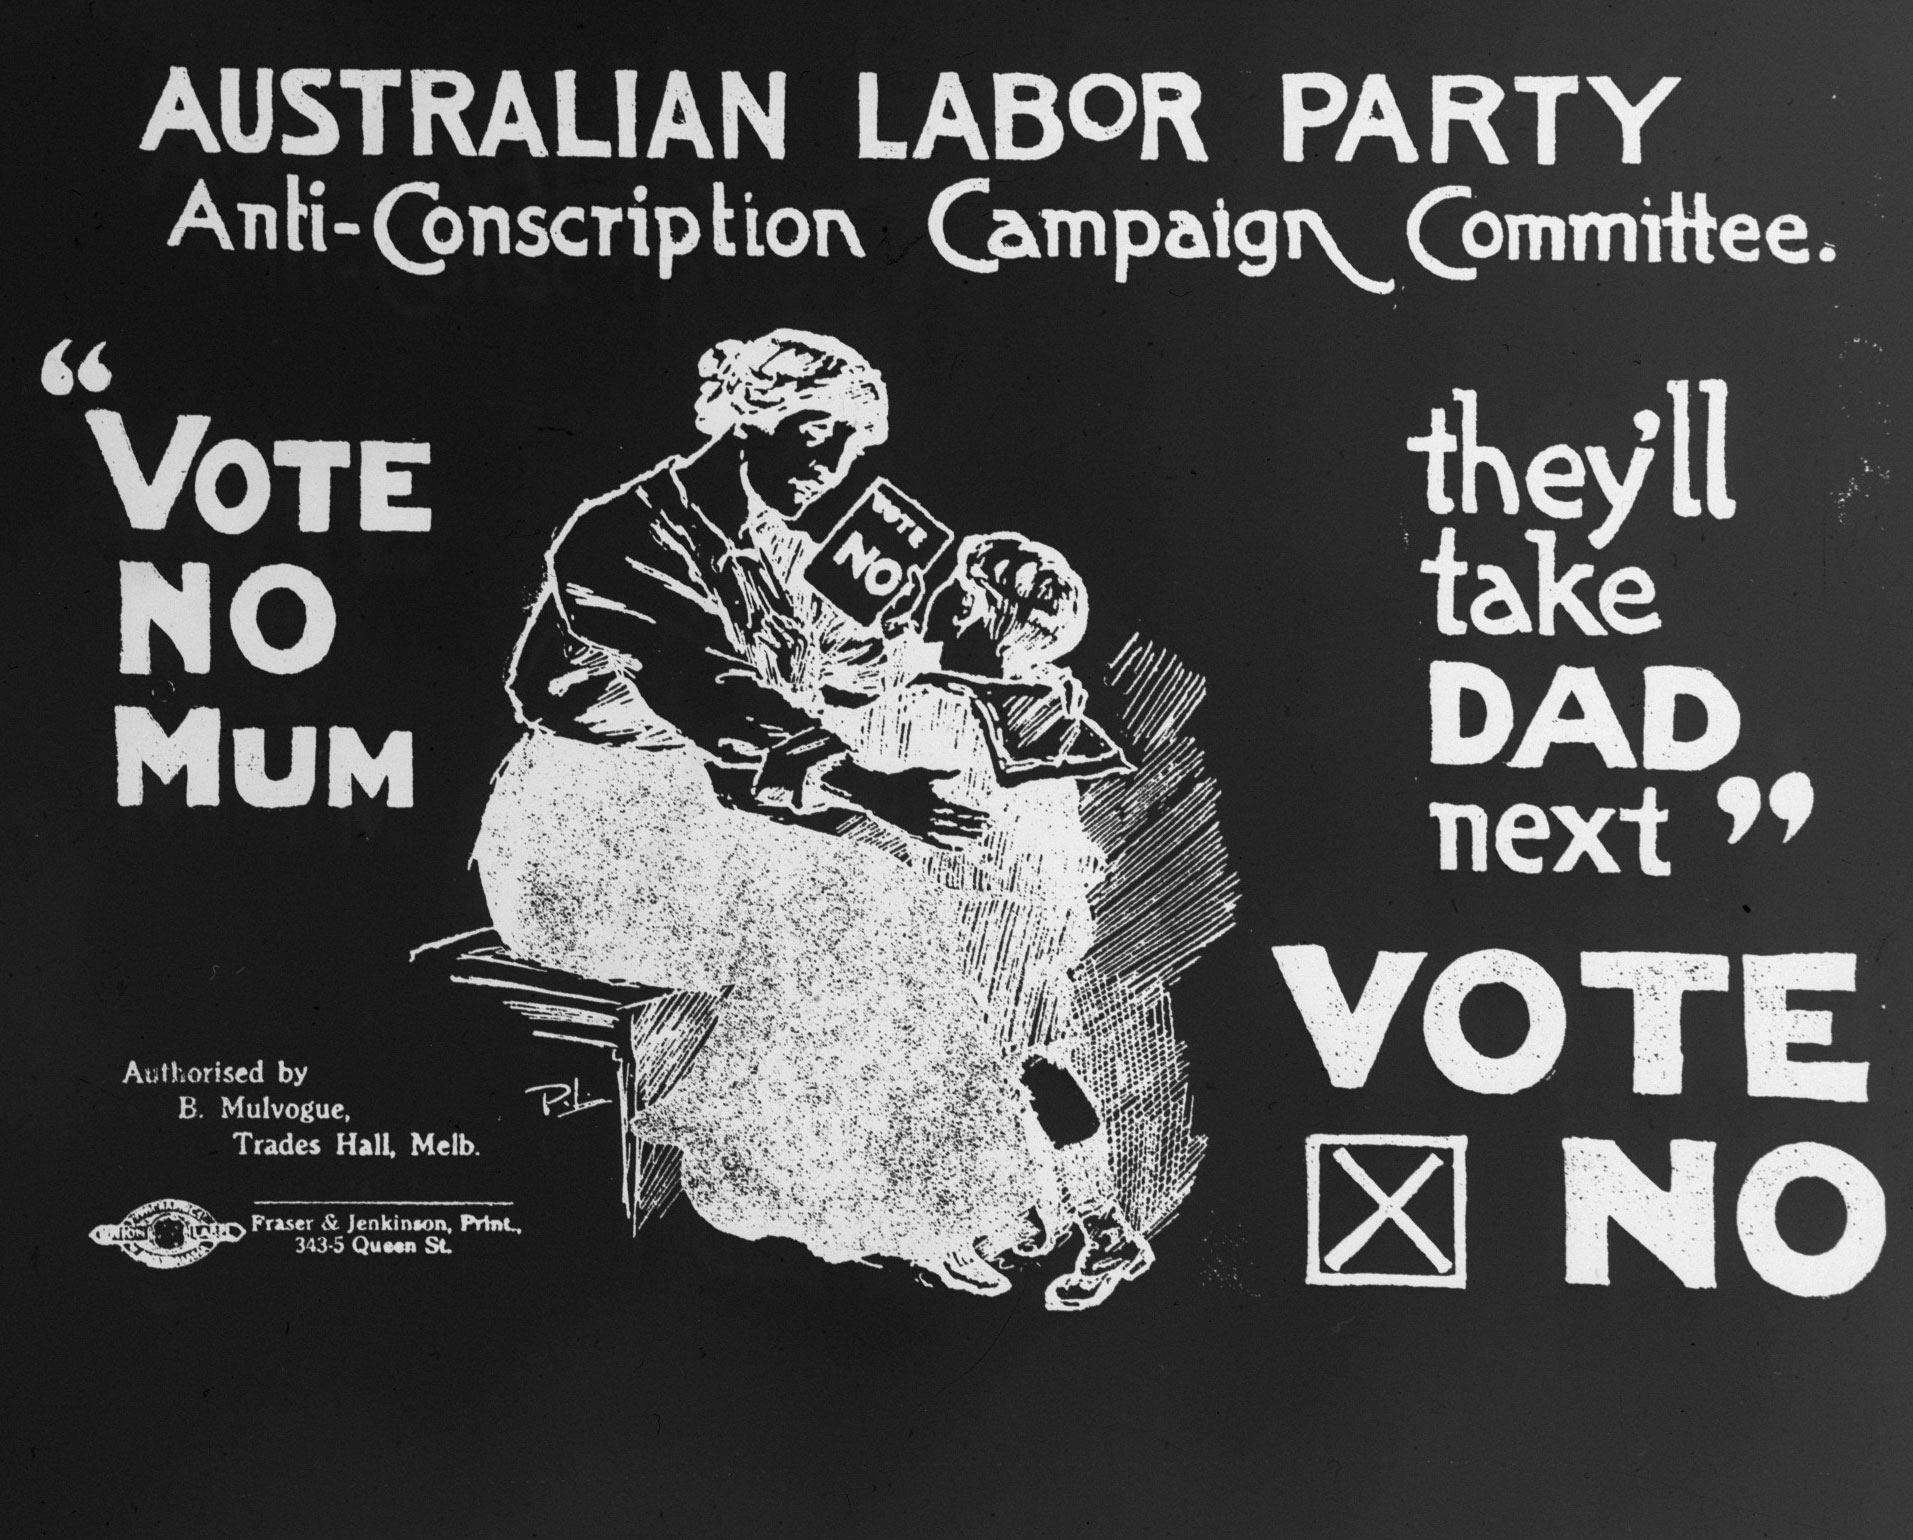 ‘Vote no mum, they’ll take dad next’ leaflet, Australian Labor Party, 1917.